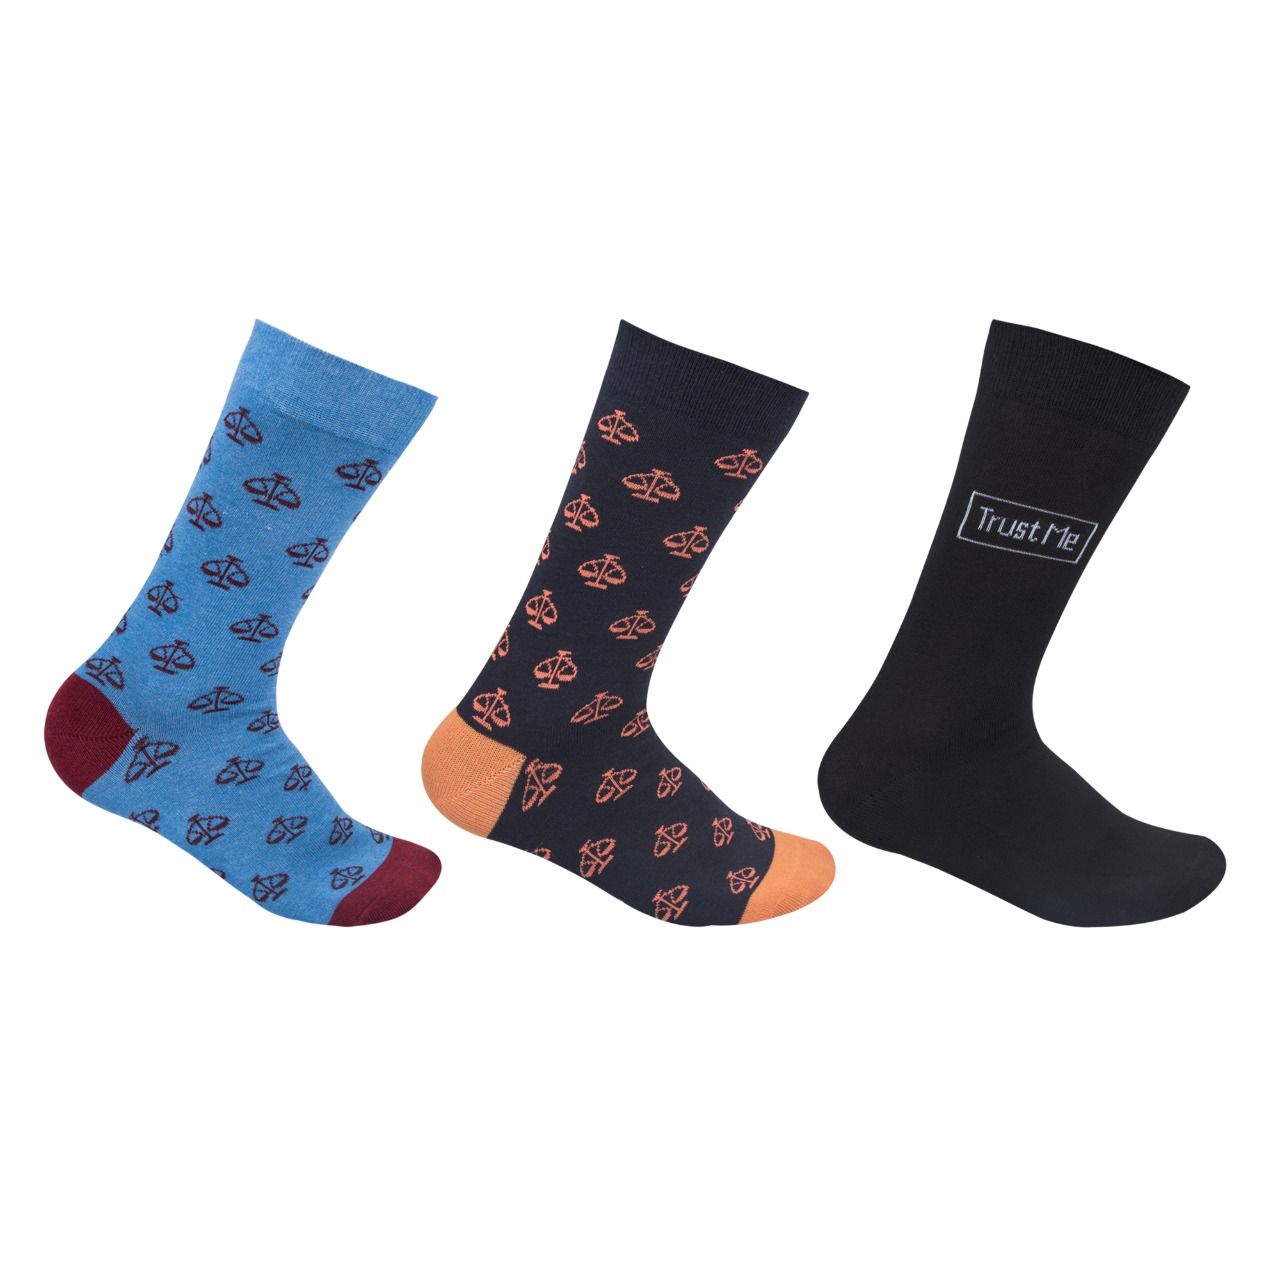 The Sassy Solicitor Colourful Socks, Full Length, Set of 3